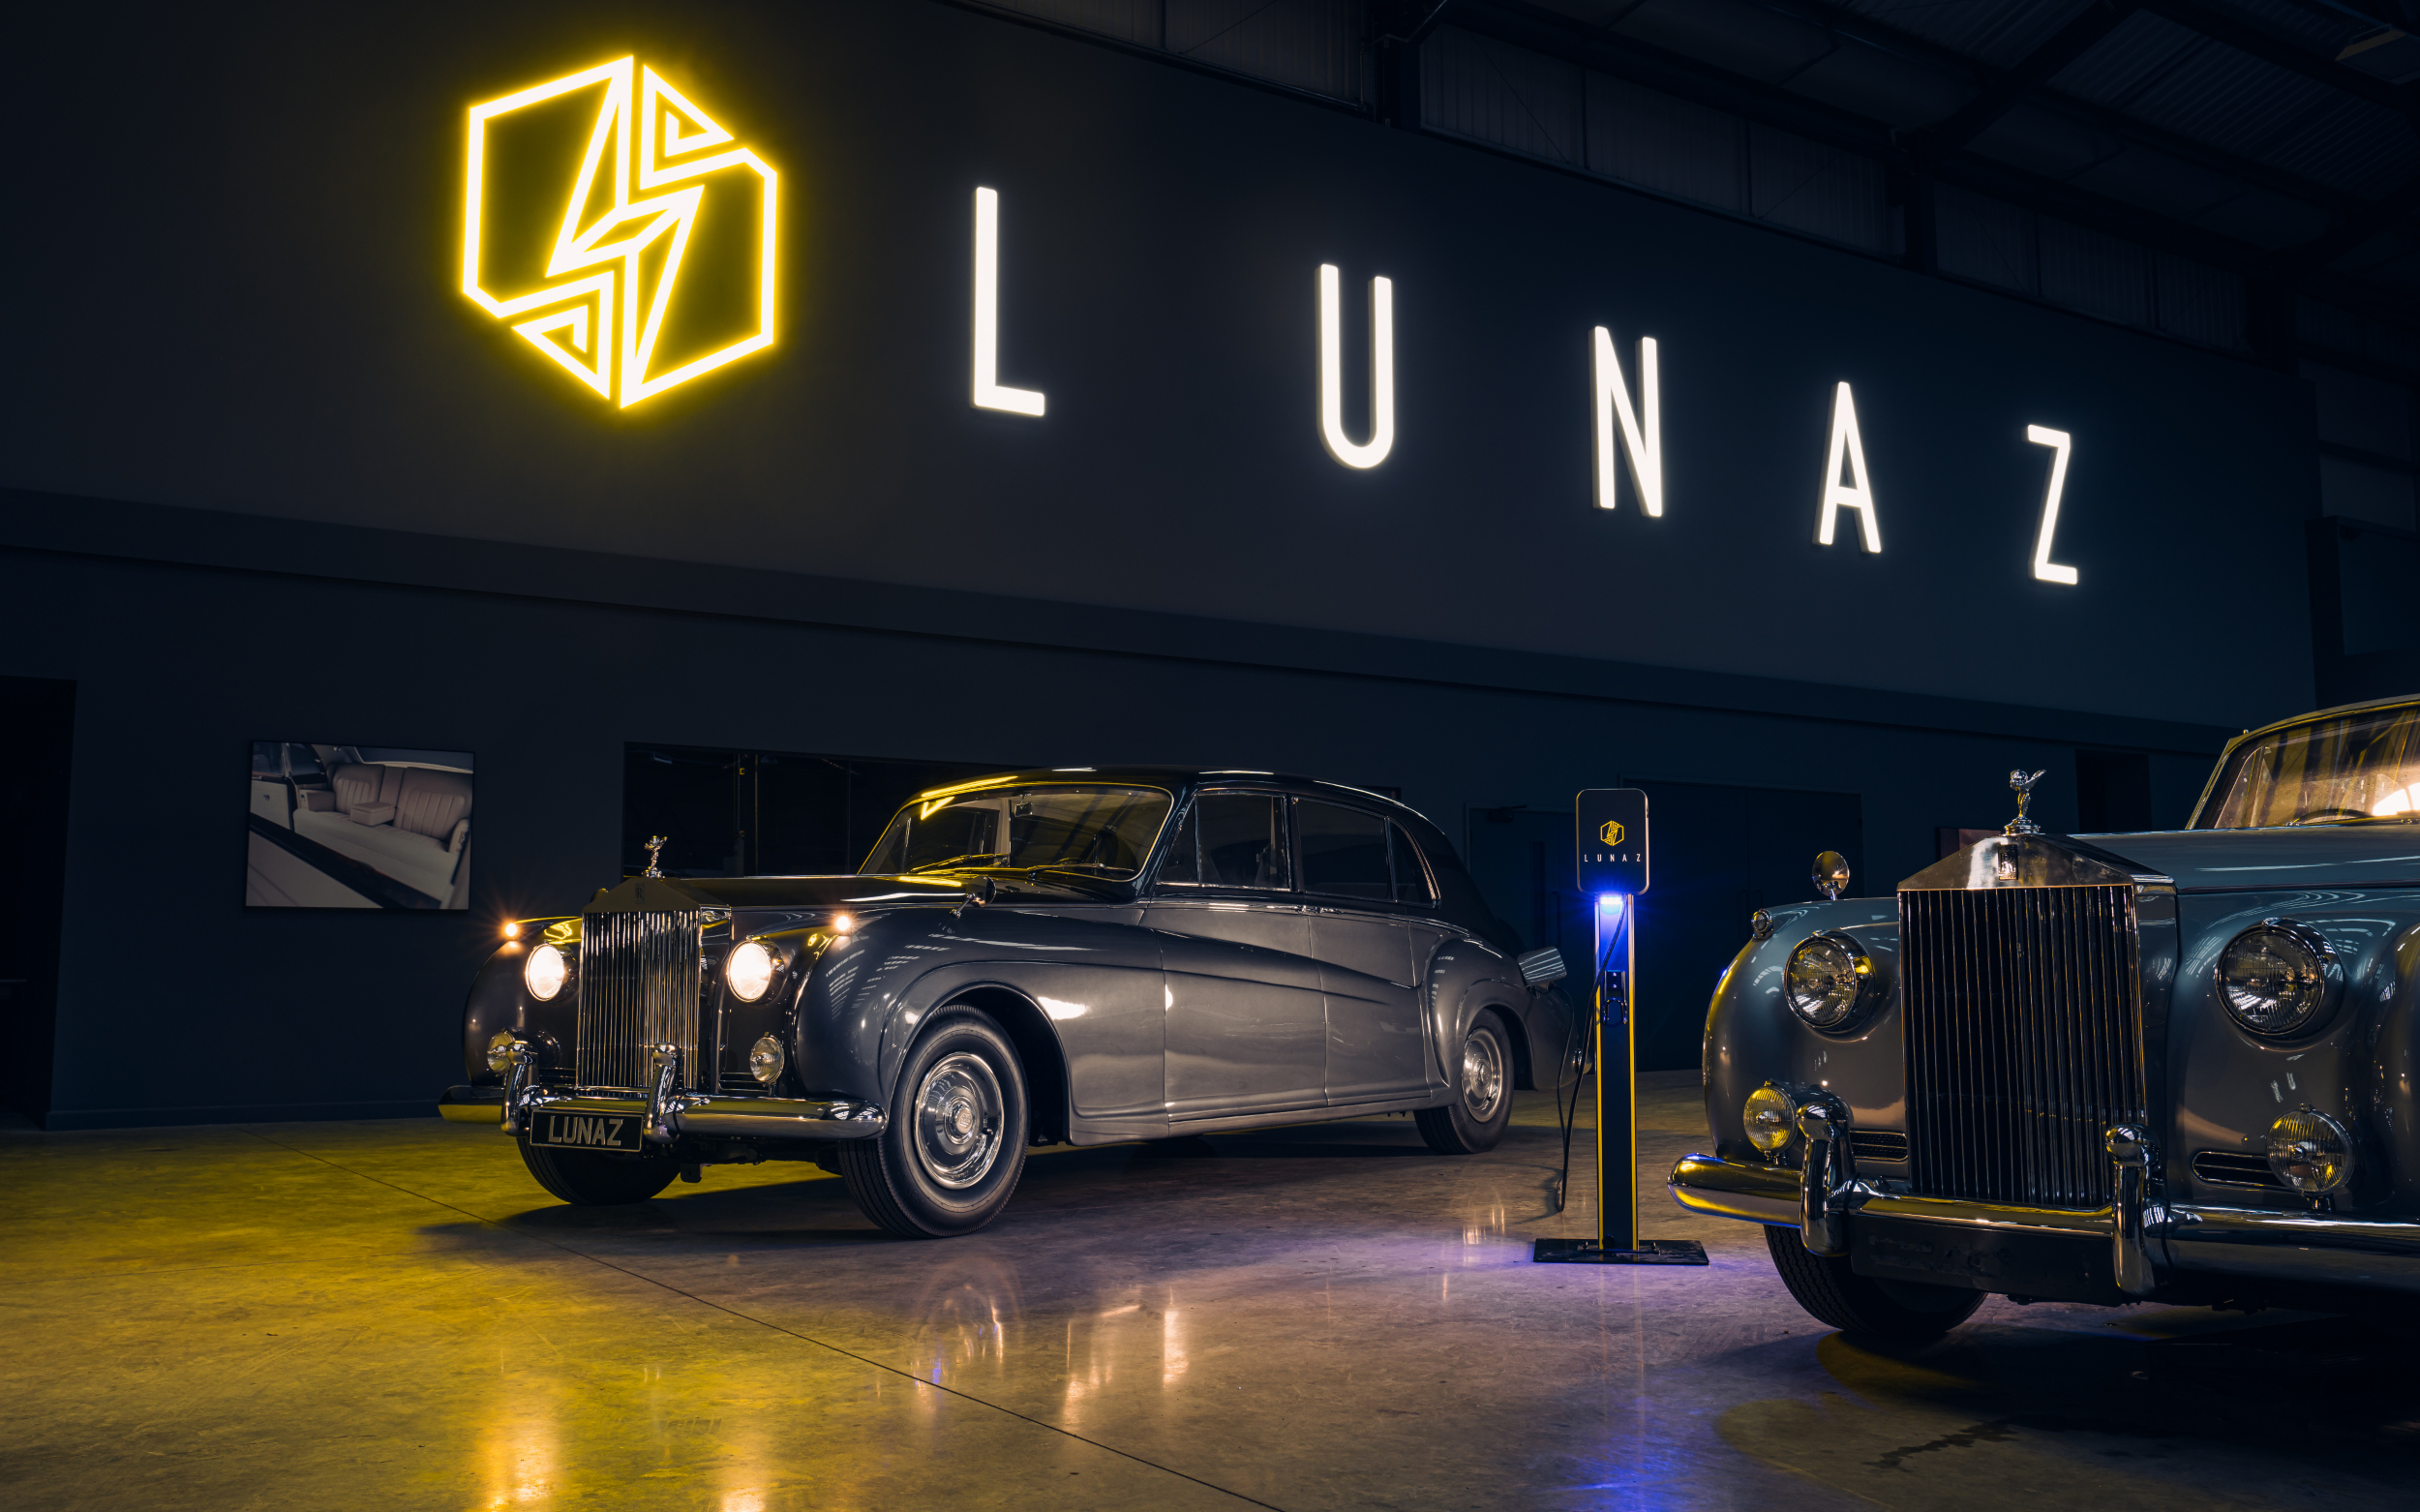 Lunaz grows production and workforce as new generation of buyers drives surge in demand for electric classic cars